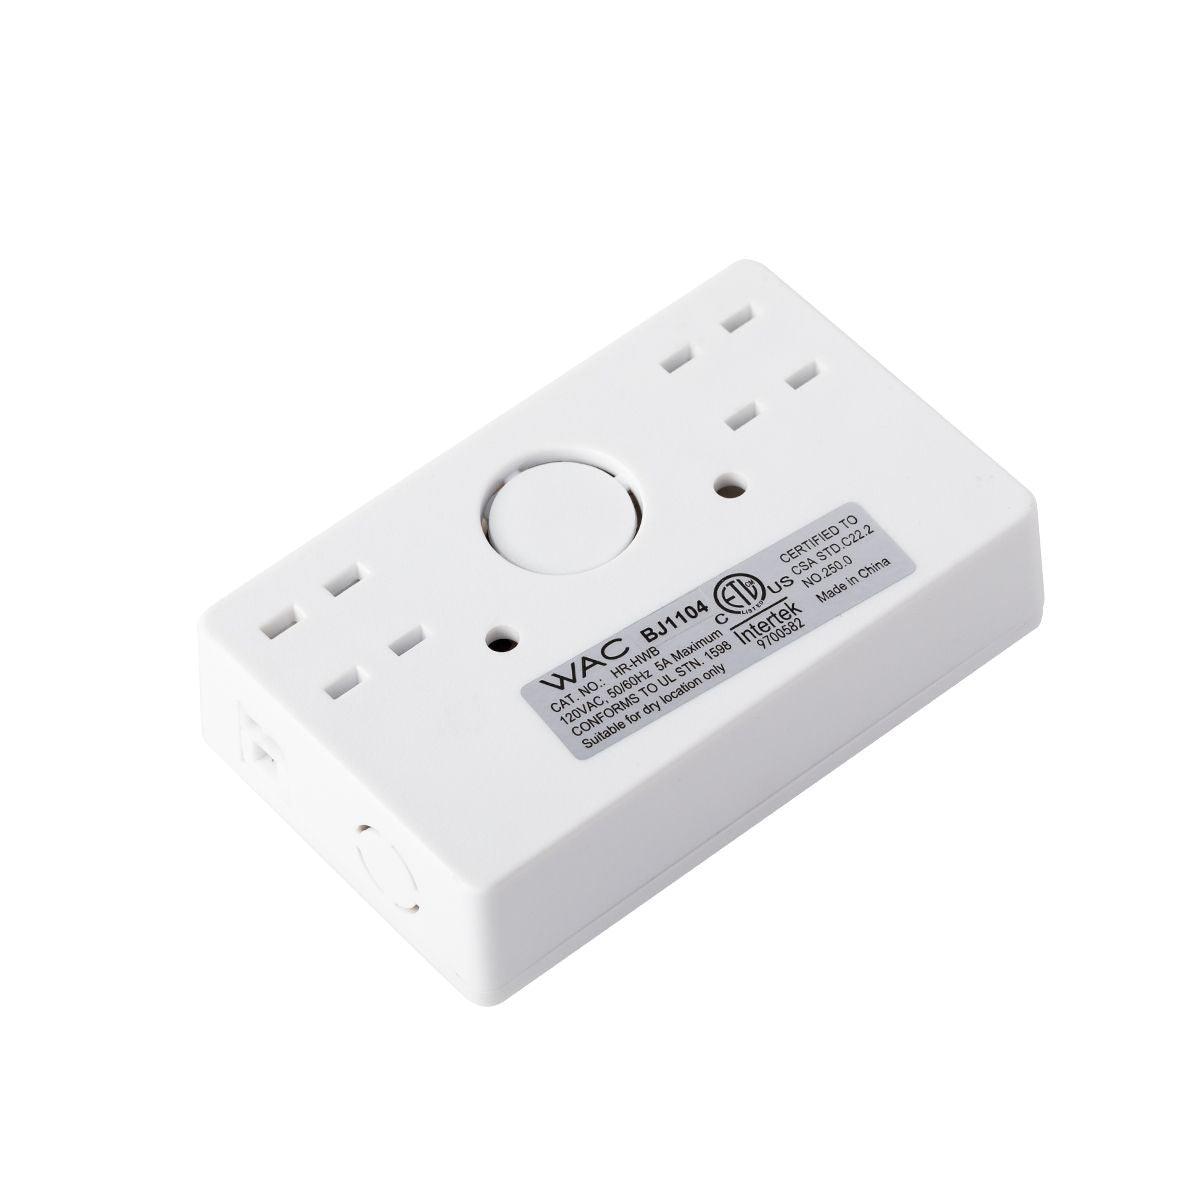 Hardwire Box For 3CCT Puck Lights, White Finish